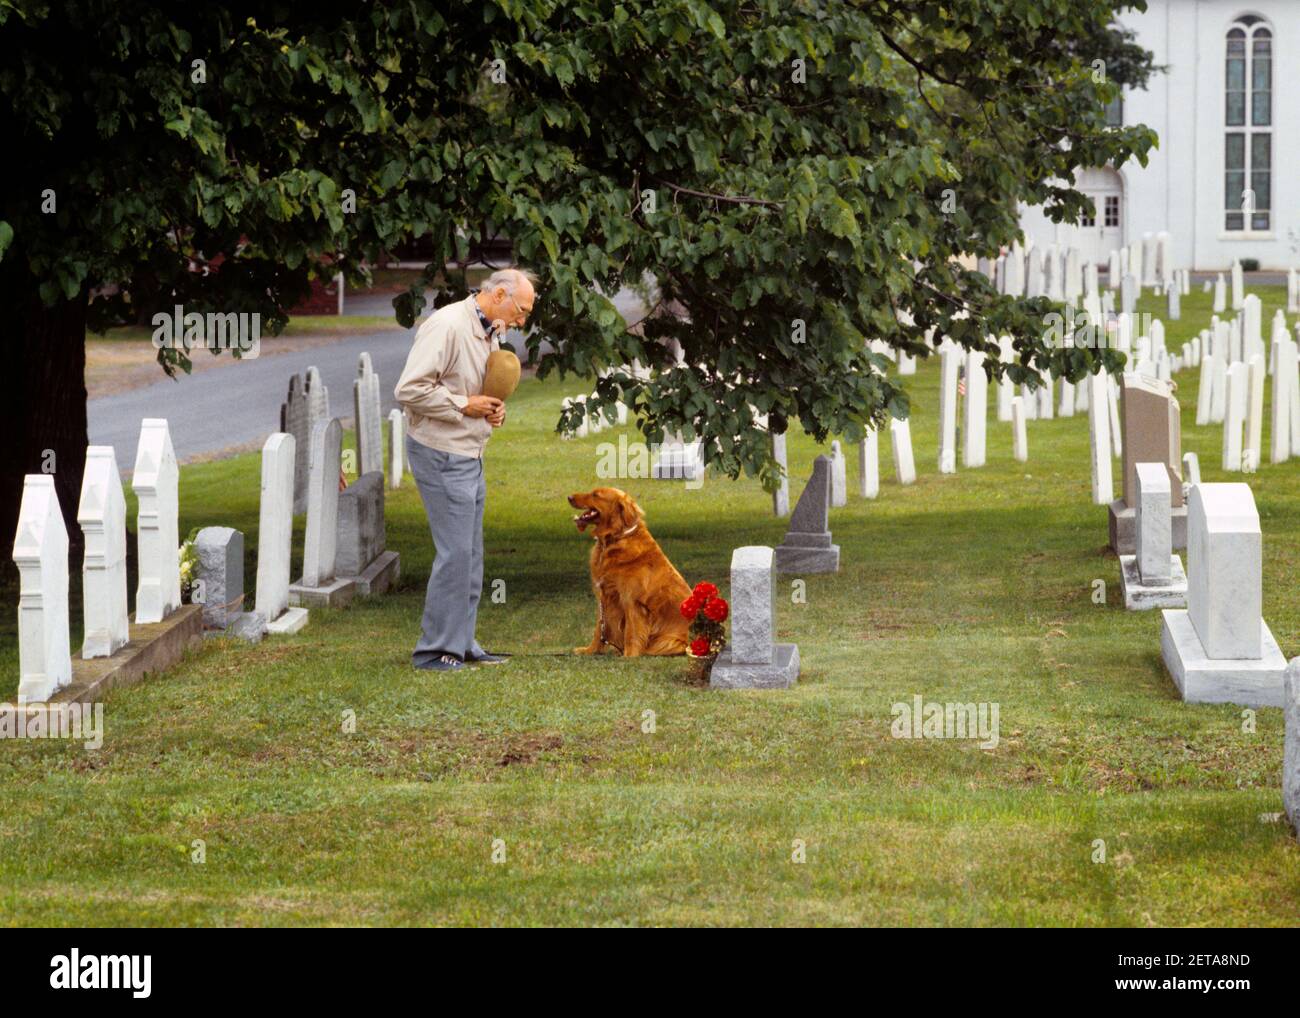 1980s ELDERLY MAN VISITING GRAVE SITE STANDING BY HEADSTONE IN CEMETERY PRAYING LOOKING DOWN AT RED IRISH SETTER DOG - cc001058 CAM001 HARS OLD AGE DEATH MARKER AGING CANINES CAM001 RESPECT HEADSTONE FEELING GRAVEYARD POOCH IRISH SETTER CONNECTION CONCEPTUAL COMPANION LONELINESS VISIT VISITING ELDERLY MAN LOVED ONE PERSONAL ATTACHMENT AFFECTION CANINE EMOTION EMOTIONAL EMOTIONS GRAVE GRIEF MAMMAL TOGETHERNESS WIDOWER CAUCASIAN ETHNICITY CEMETERY GRAVES OLD FASHIONED REMEMBRANCE TOMBSTONES Stock Photo